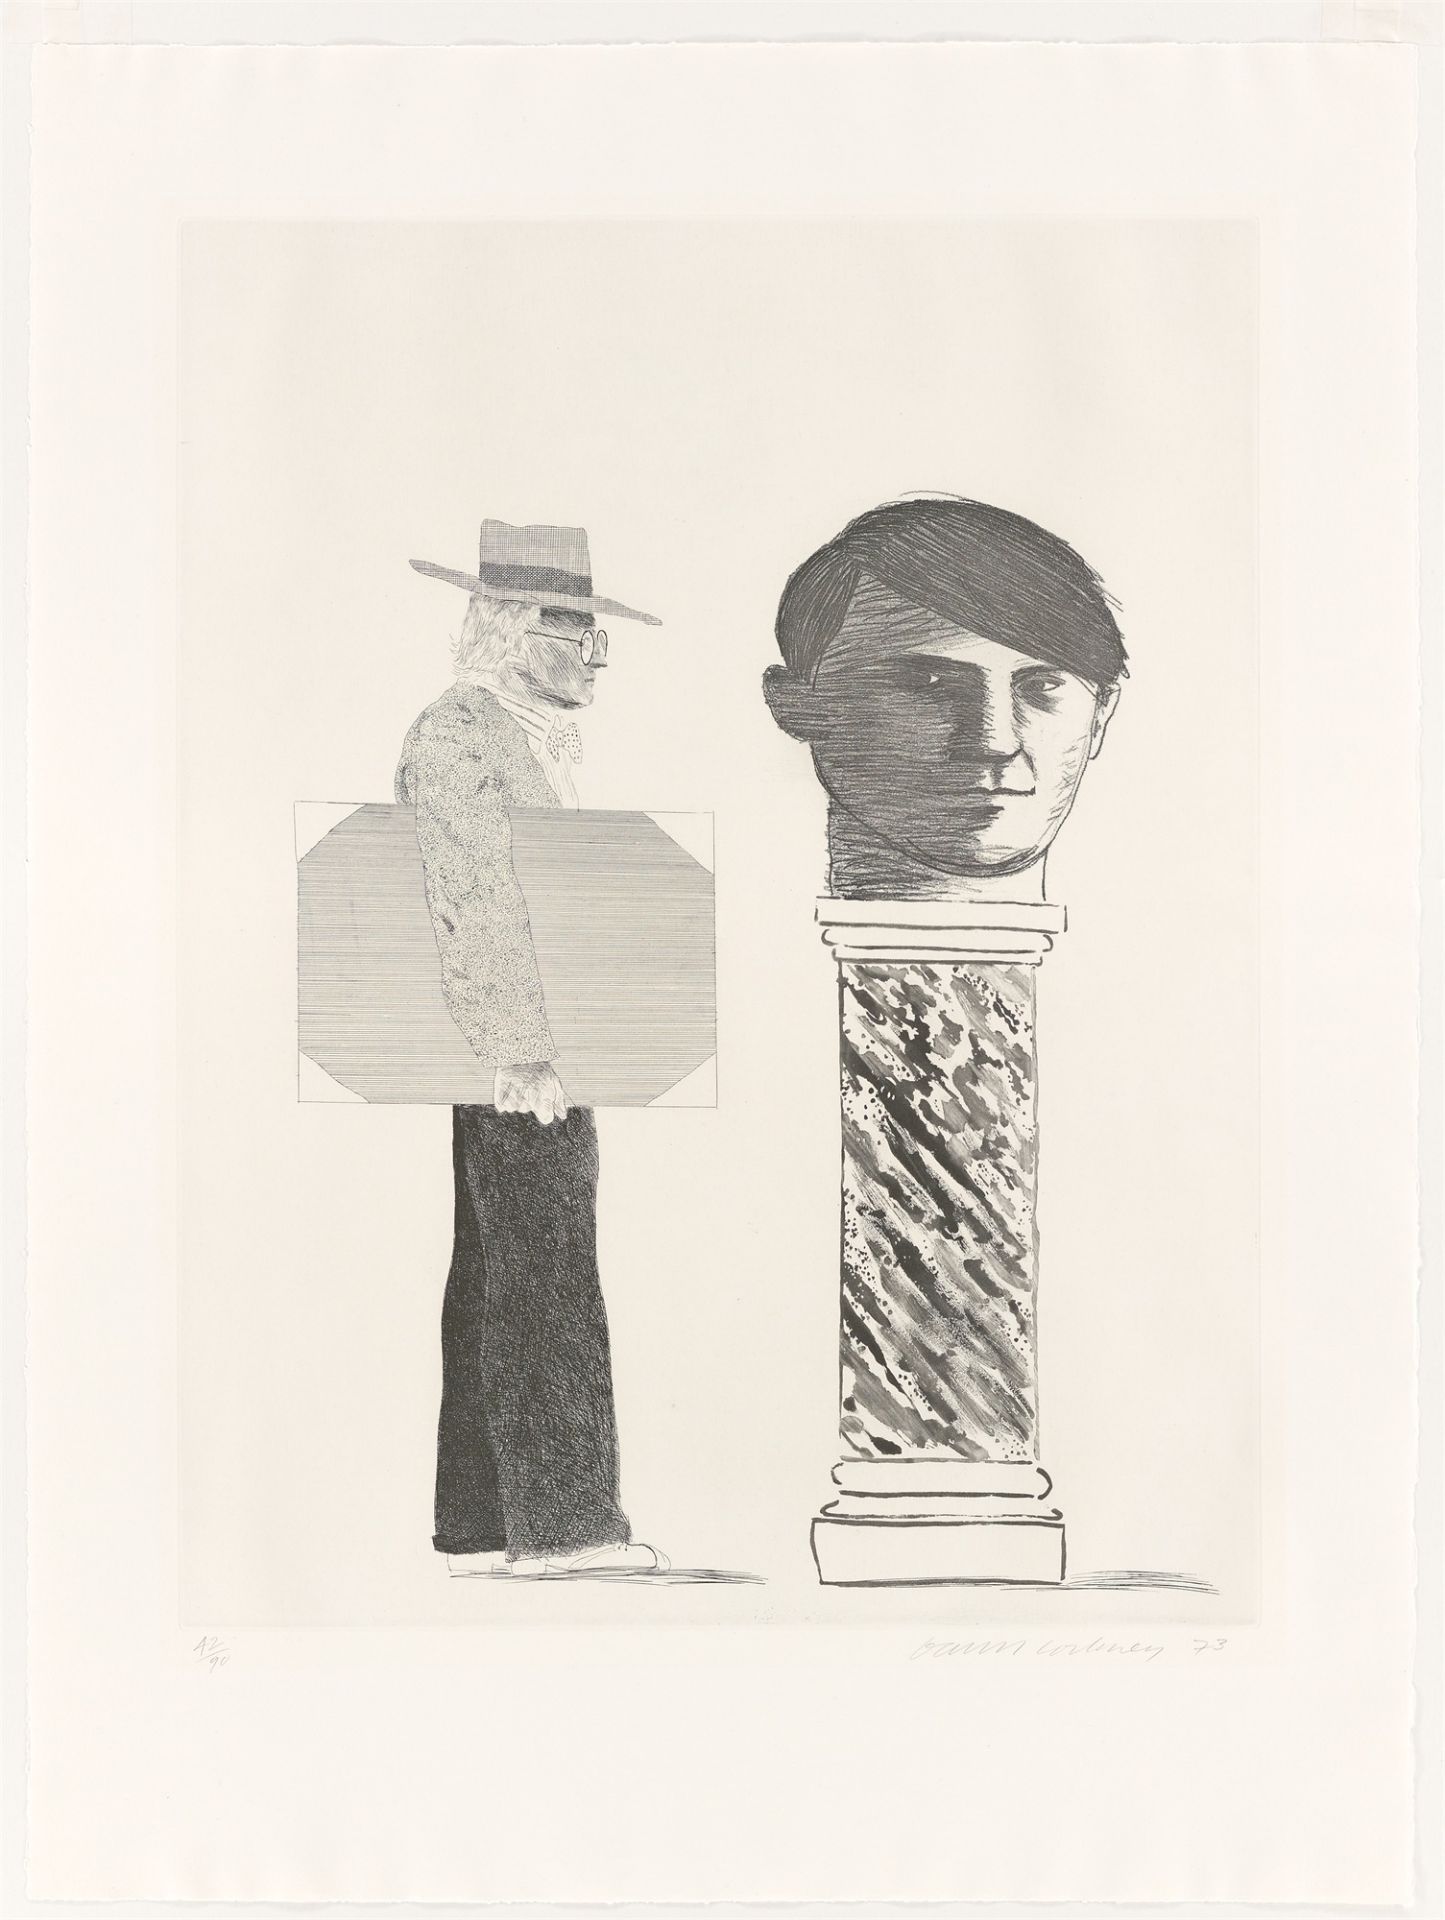 David Hockney. The Student: Homage to Picasso. 1973